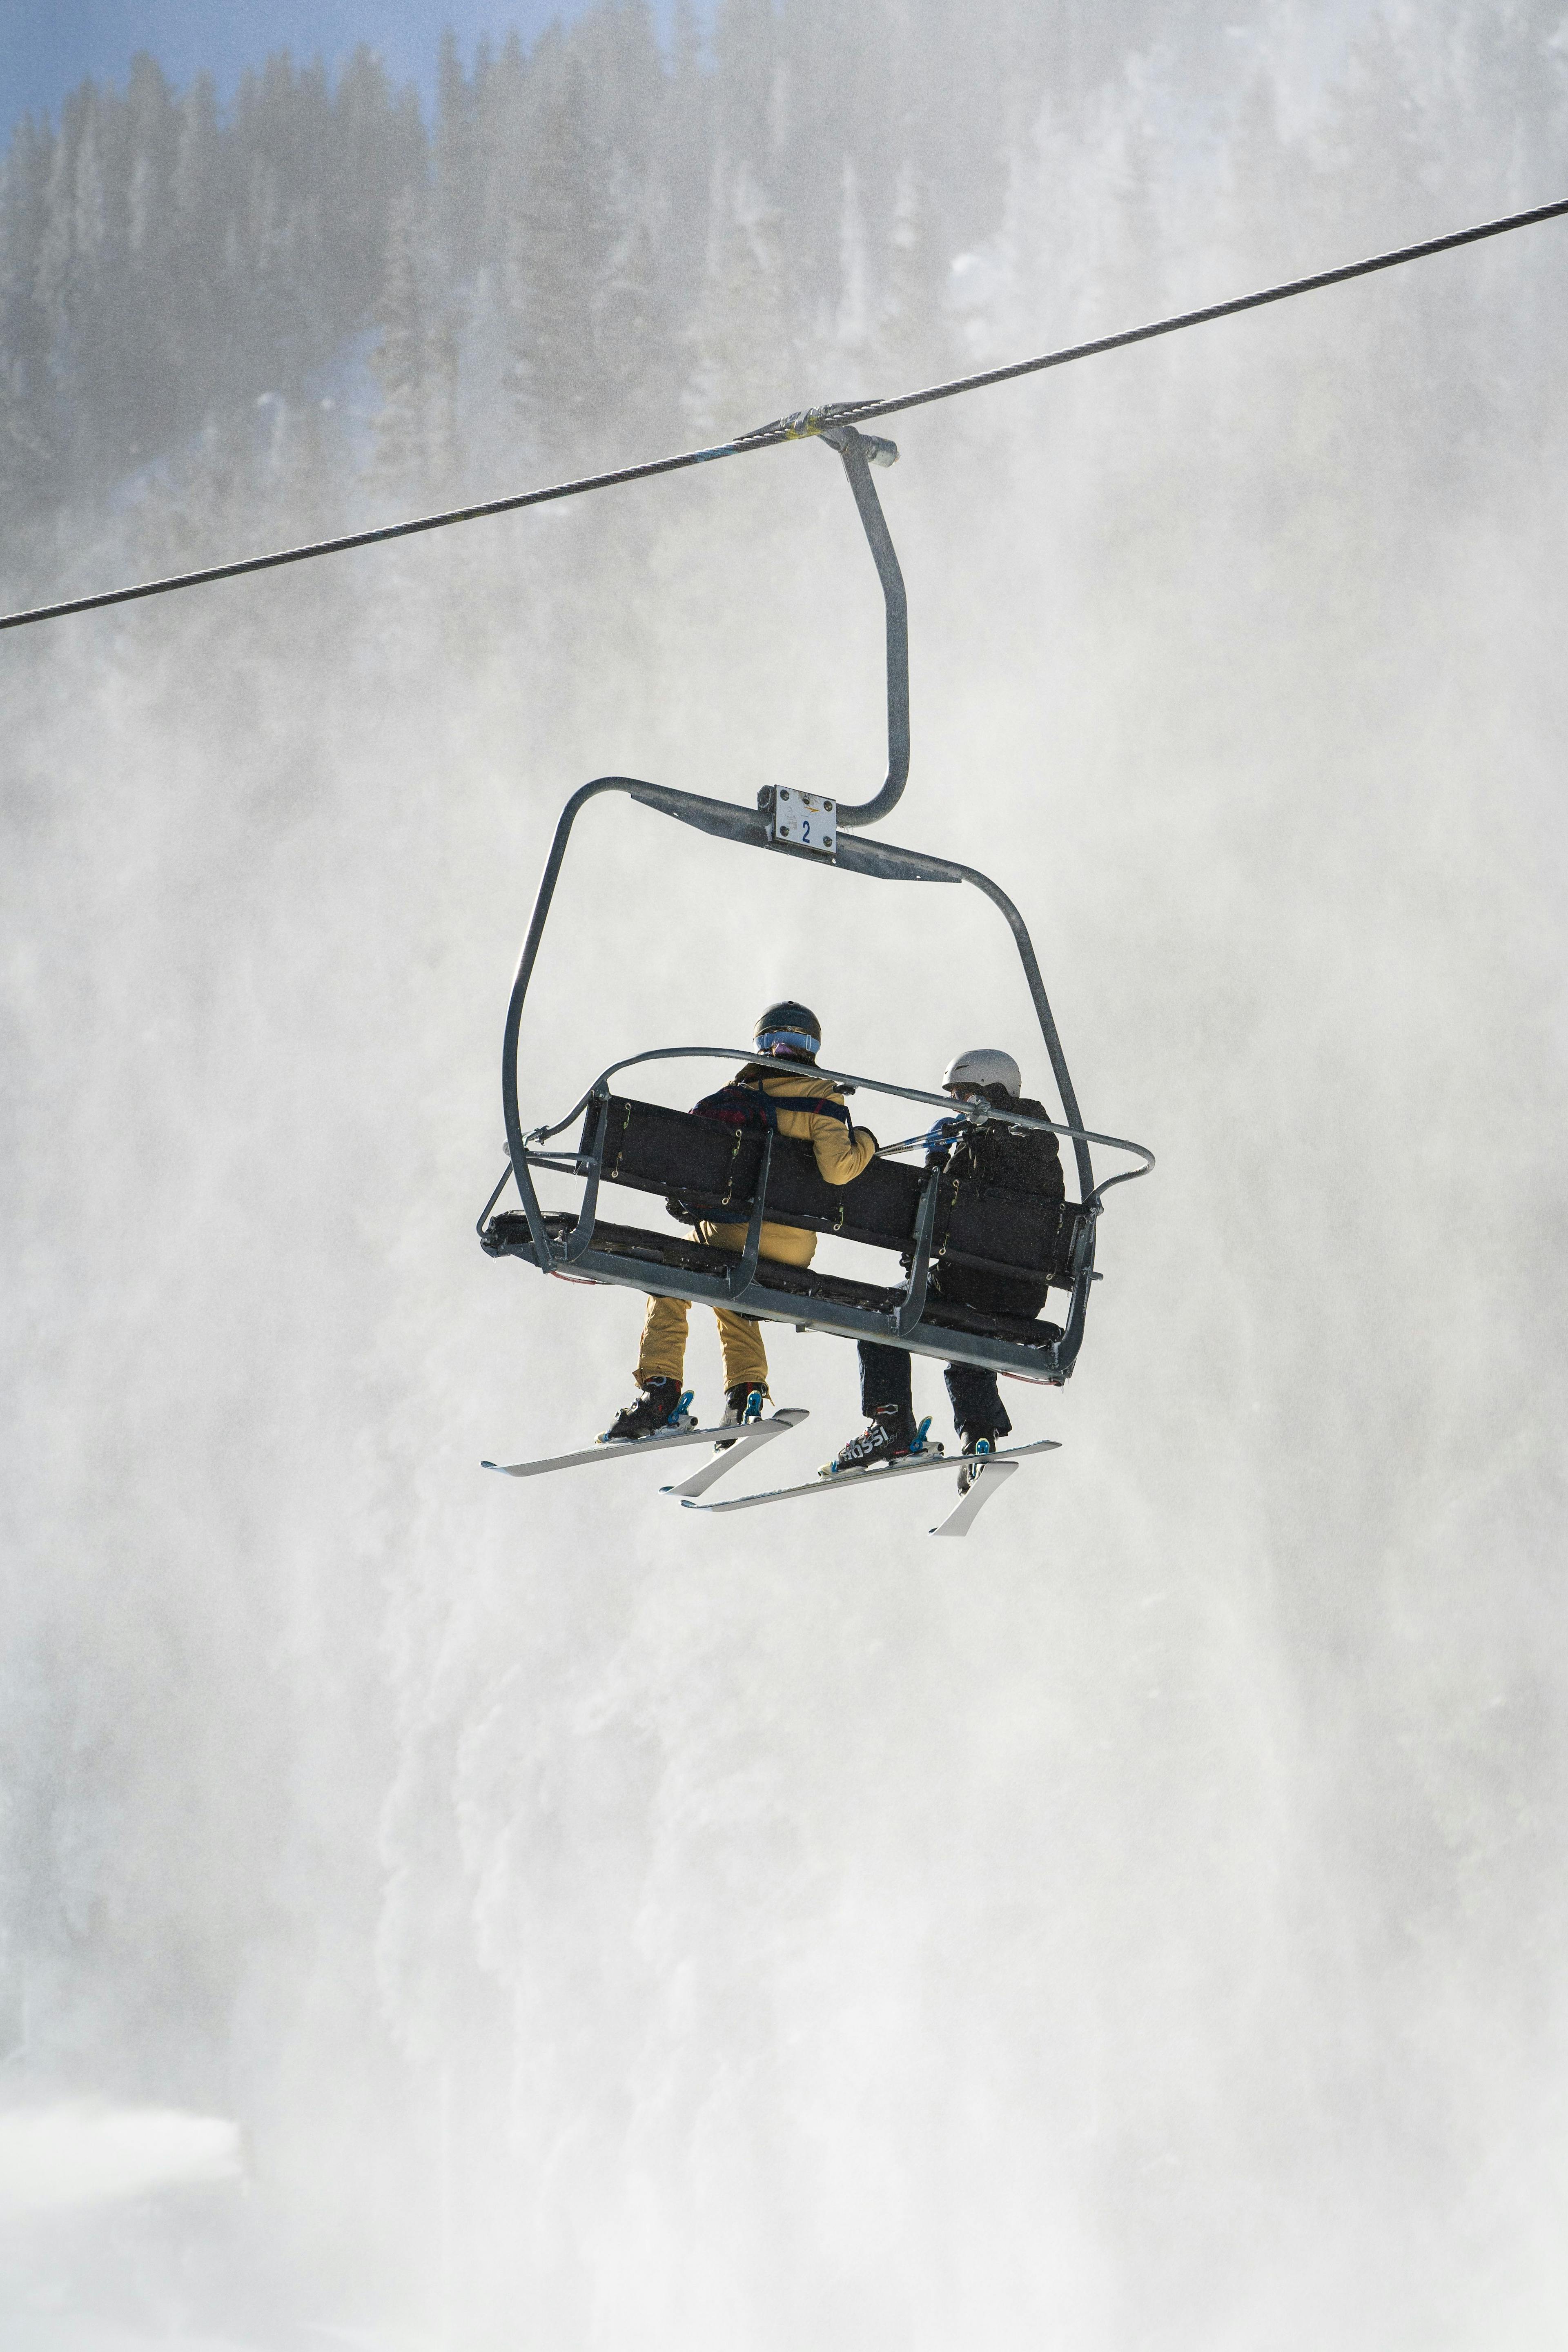 skiers riding the lift on a snowy day